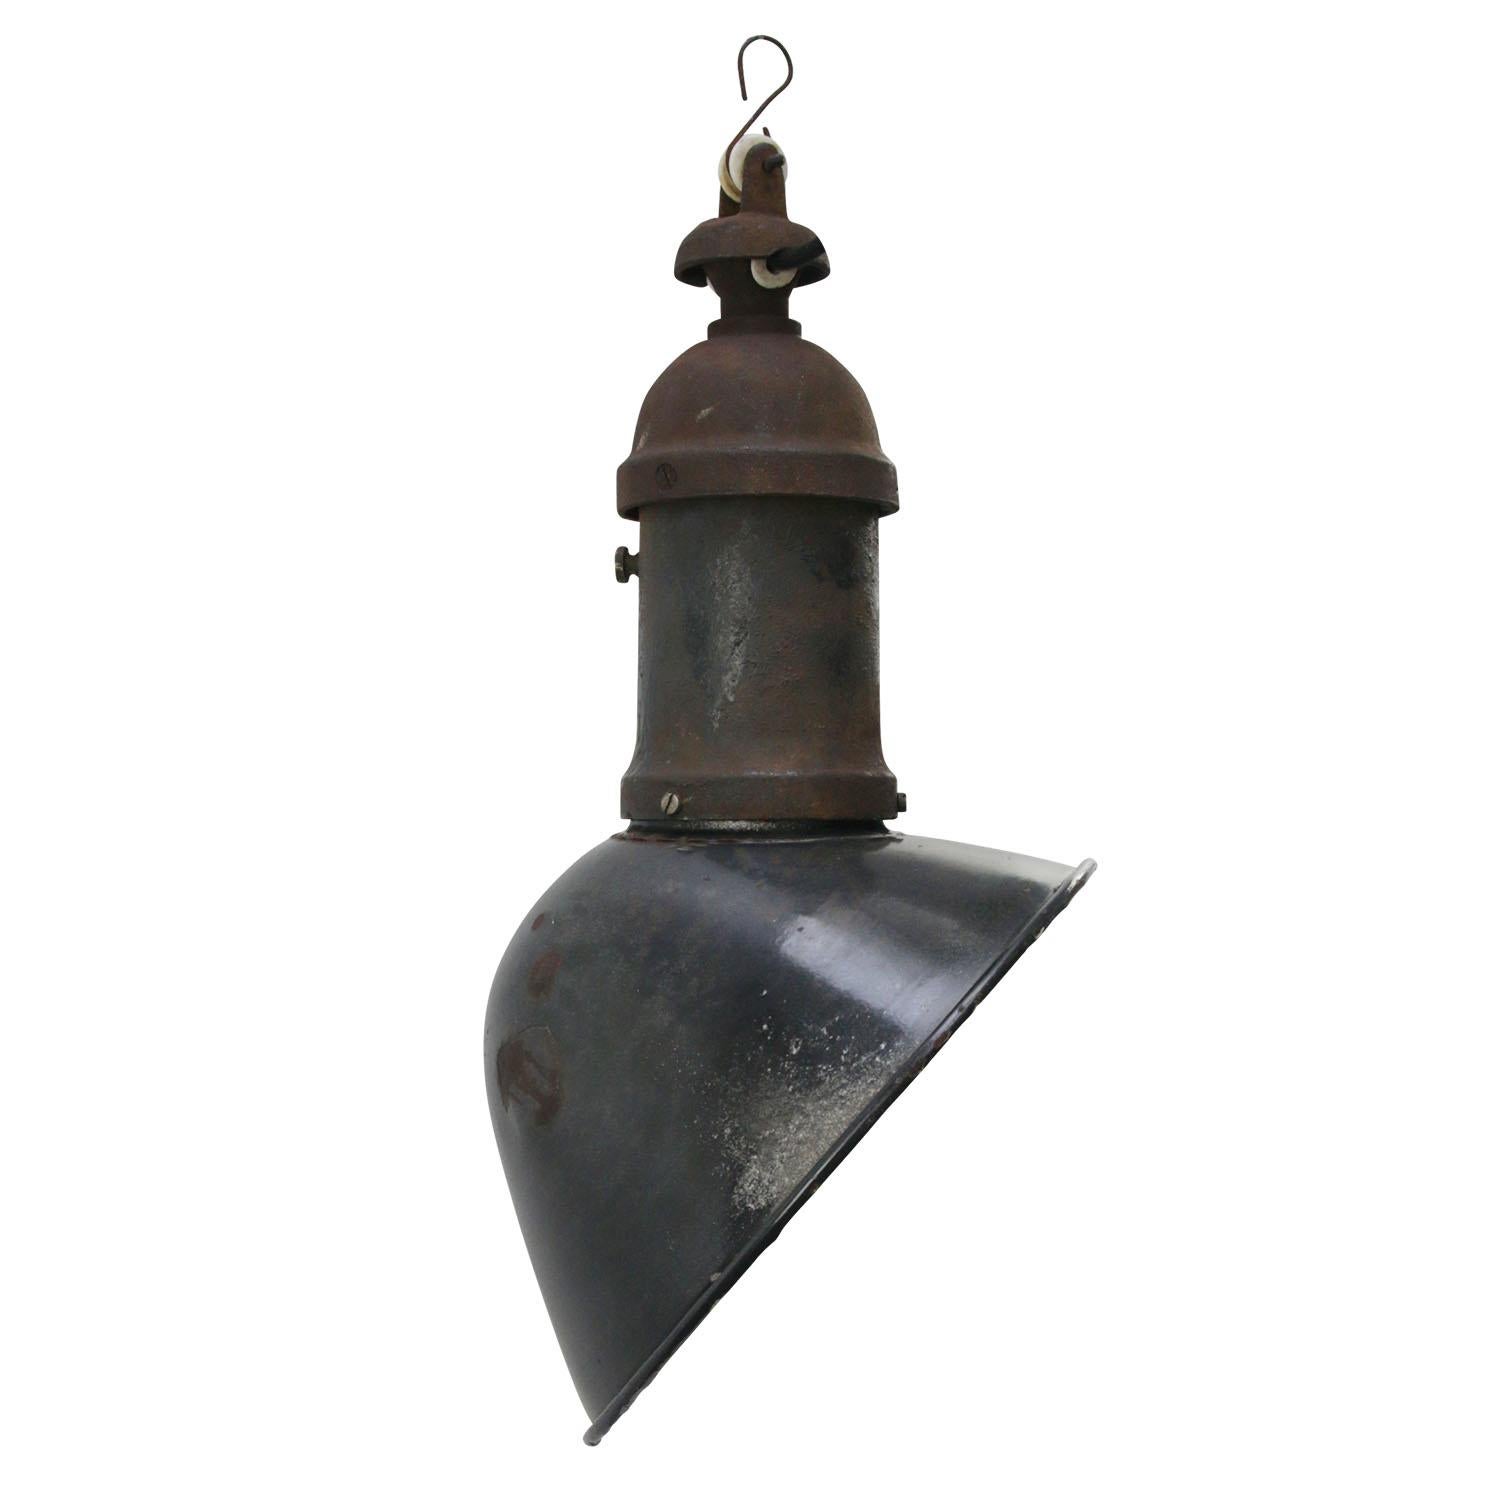 French Asymmetrical black industrial pendant
Black enamel with cast iron top
Rare model used in warehouses and factories

Weight: 3.60 kg / 7.9 lb

Priced per individual item. All lamps have been made suitable by international standards for